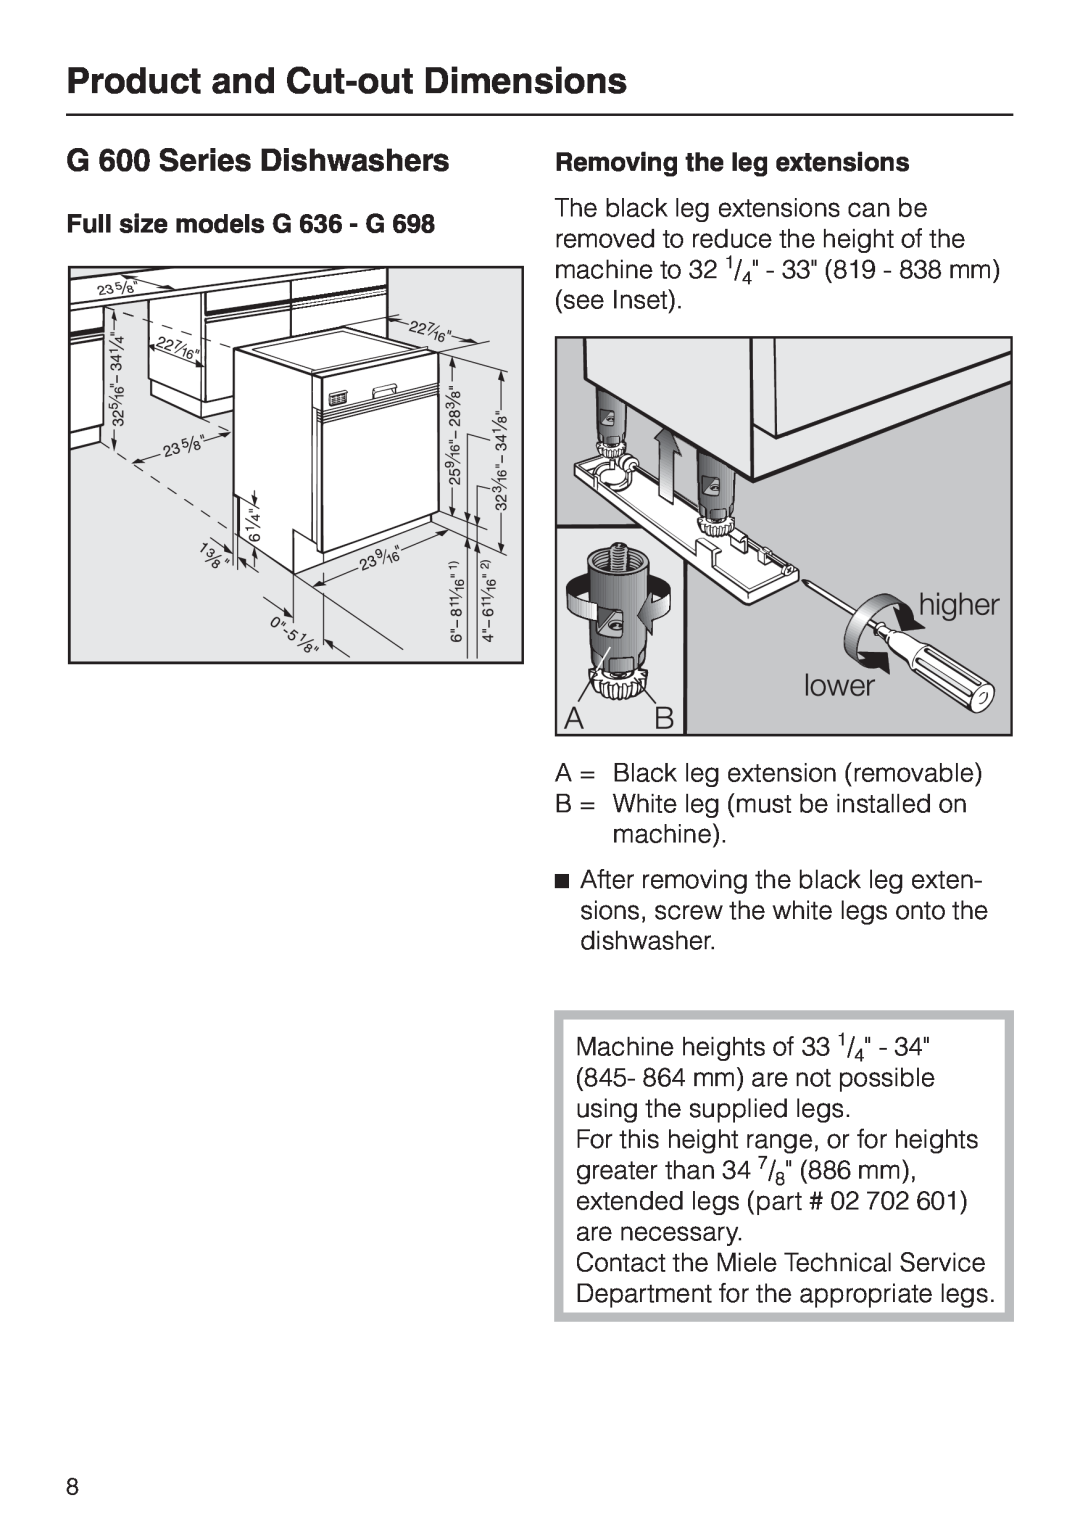 Miele HG02 installation instructions Product and Cut-outDimensions, G 600 Series Dishwashers, Full size models G 636 - G 